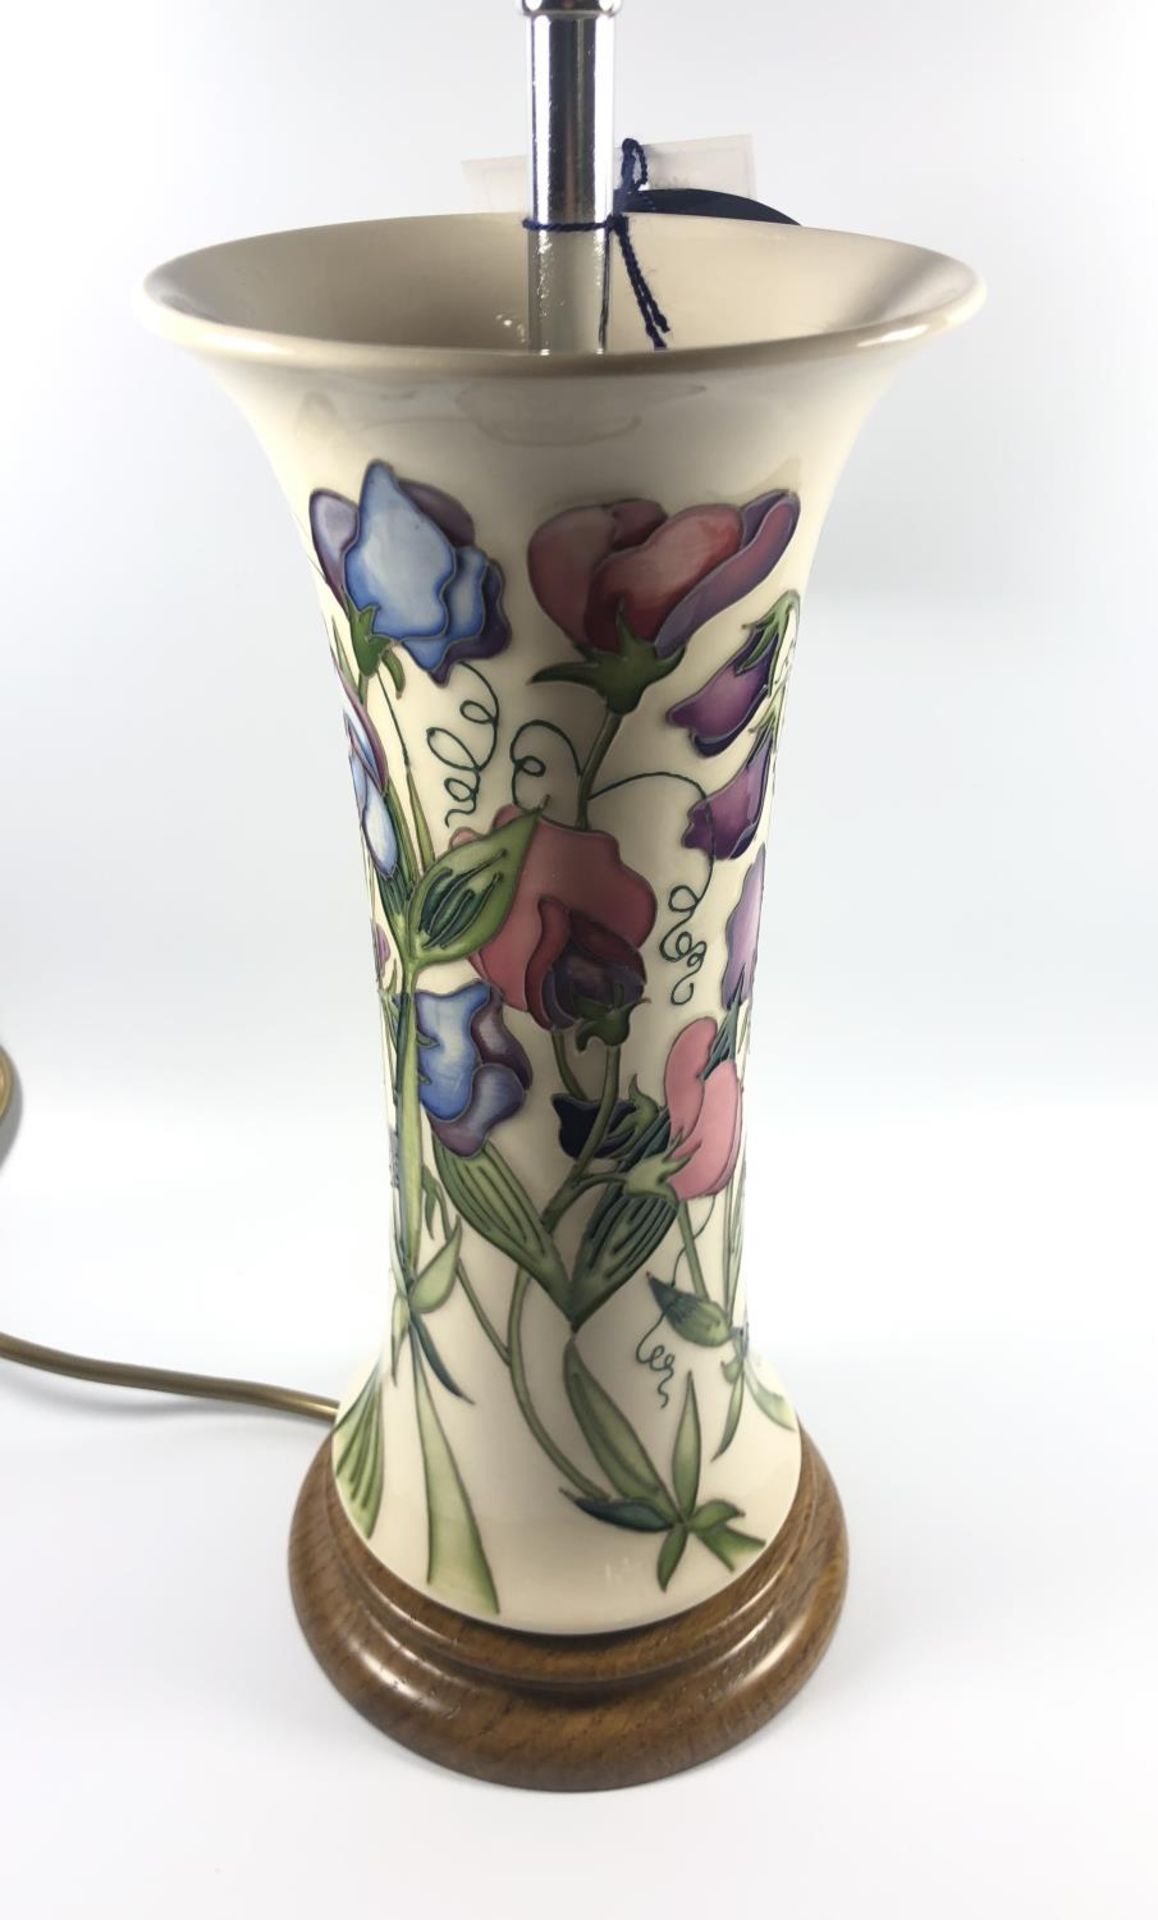 A MOORCROFT POTTERY LAMP BASE IN THE 'SWEETNESS' PATTERN, HEIGHT 38CM INCLUDING FITTING, SMALL